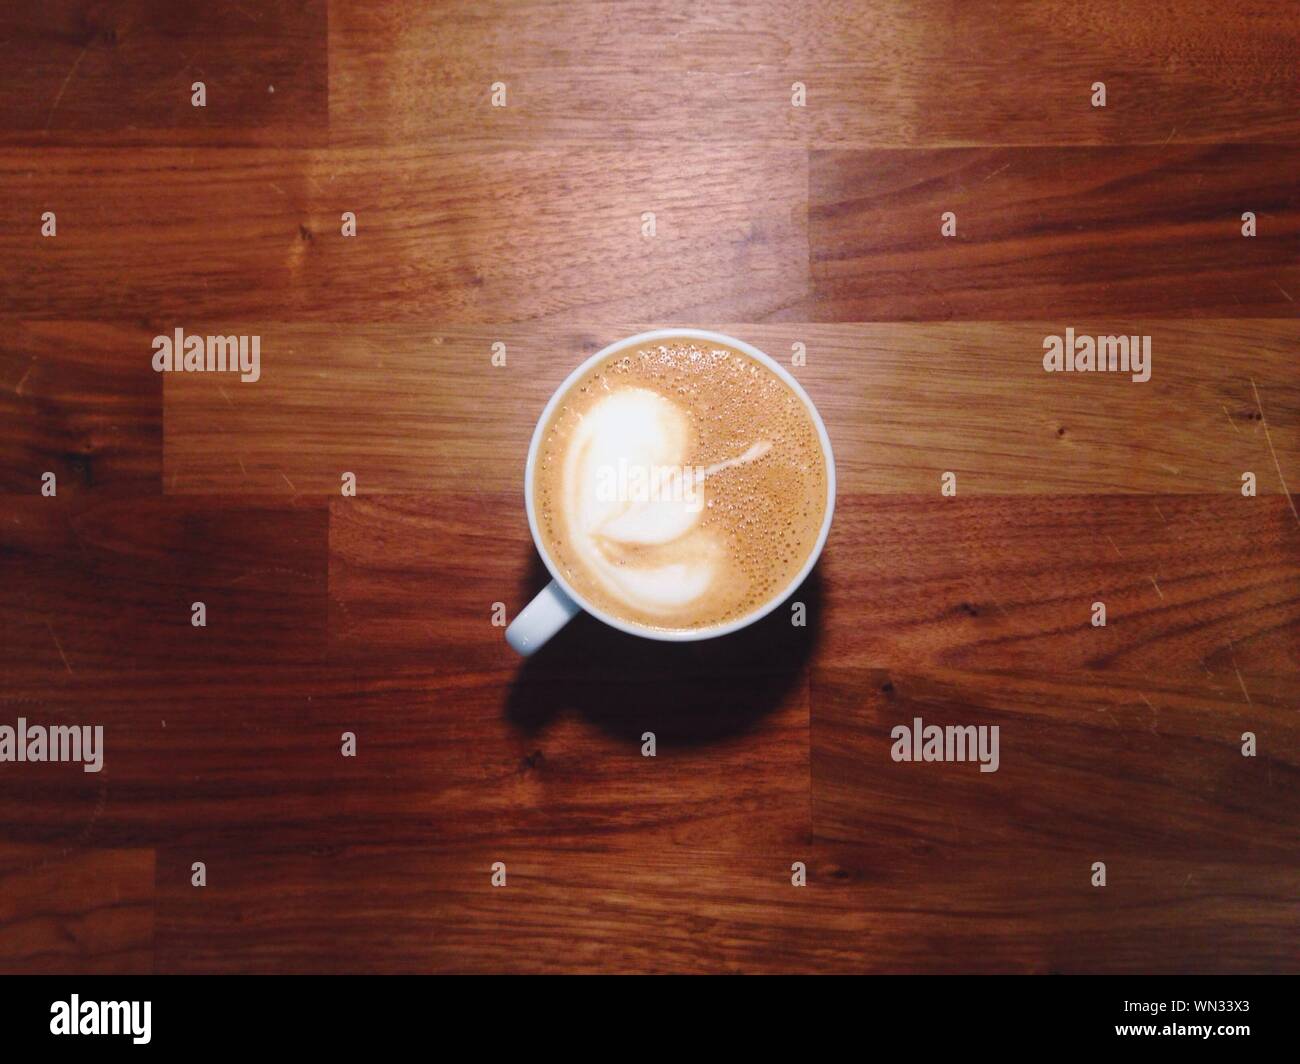 High Angle View Of Coffee With Froth Art On Hardwood Floor Stock Photo